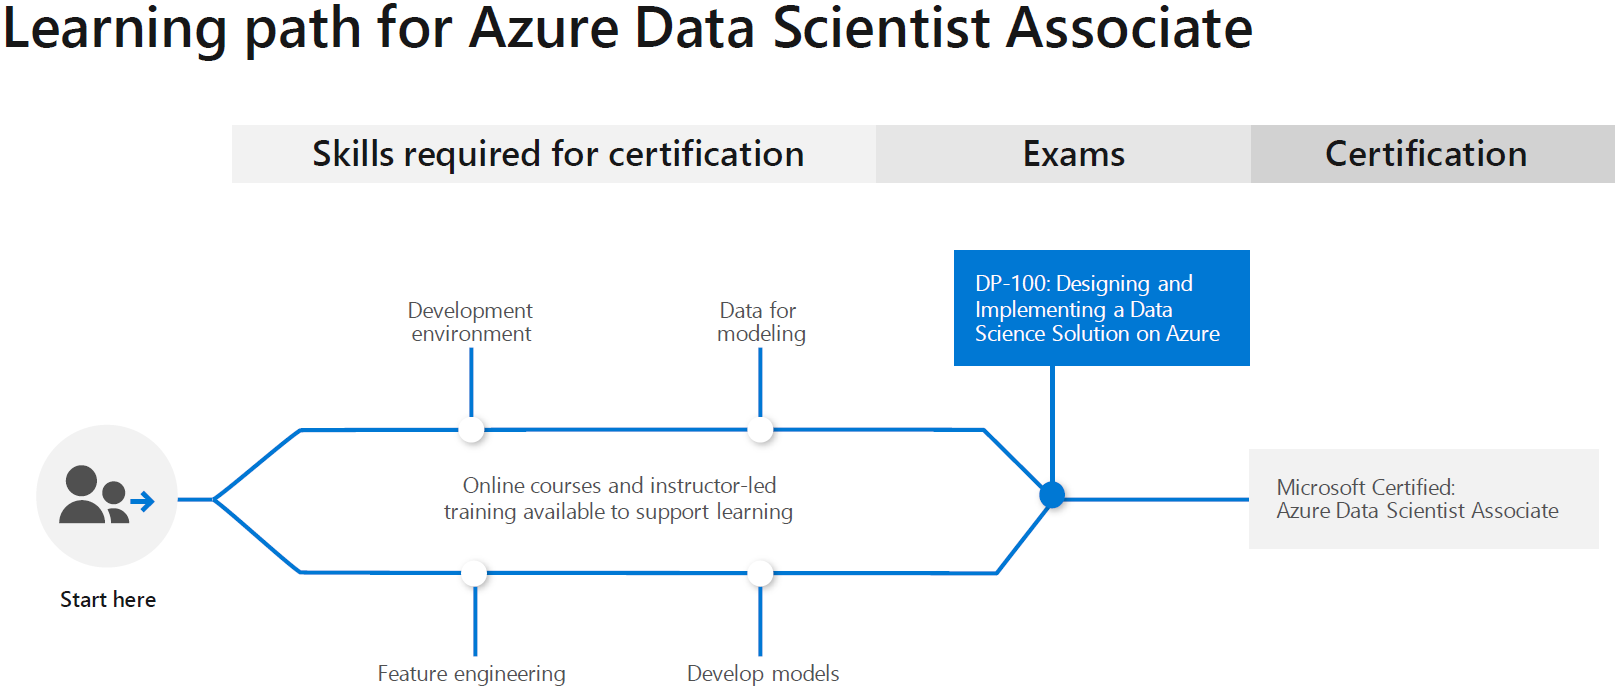 Learning Path for Azure Data Scientist Associate